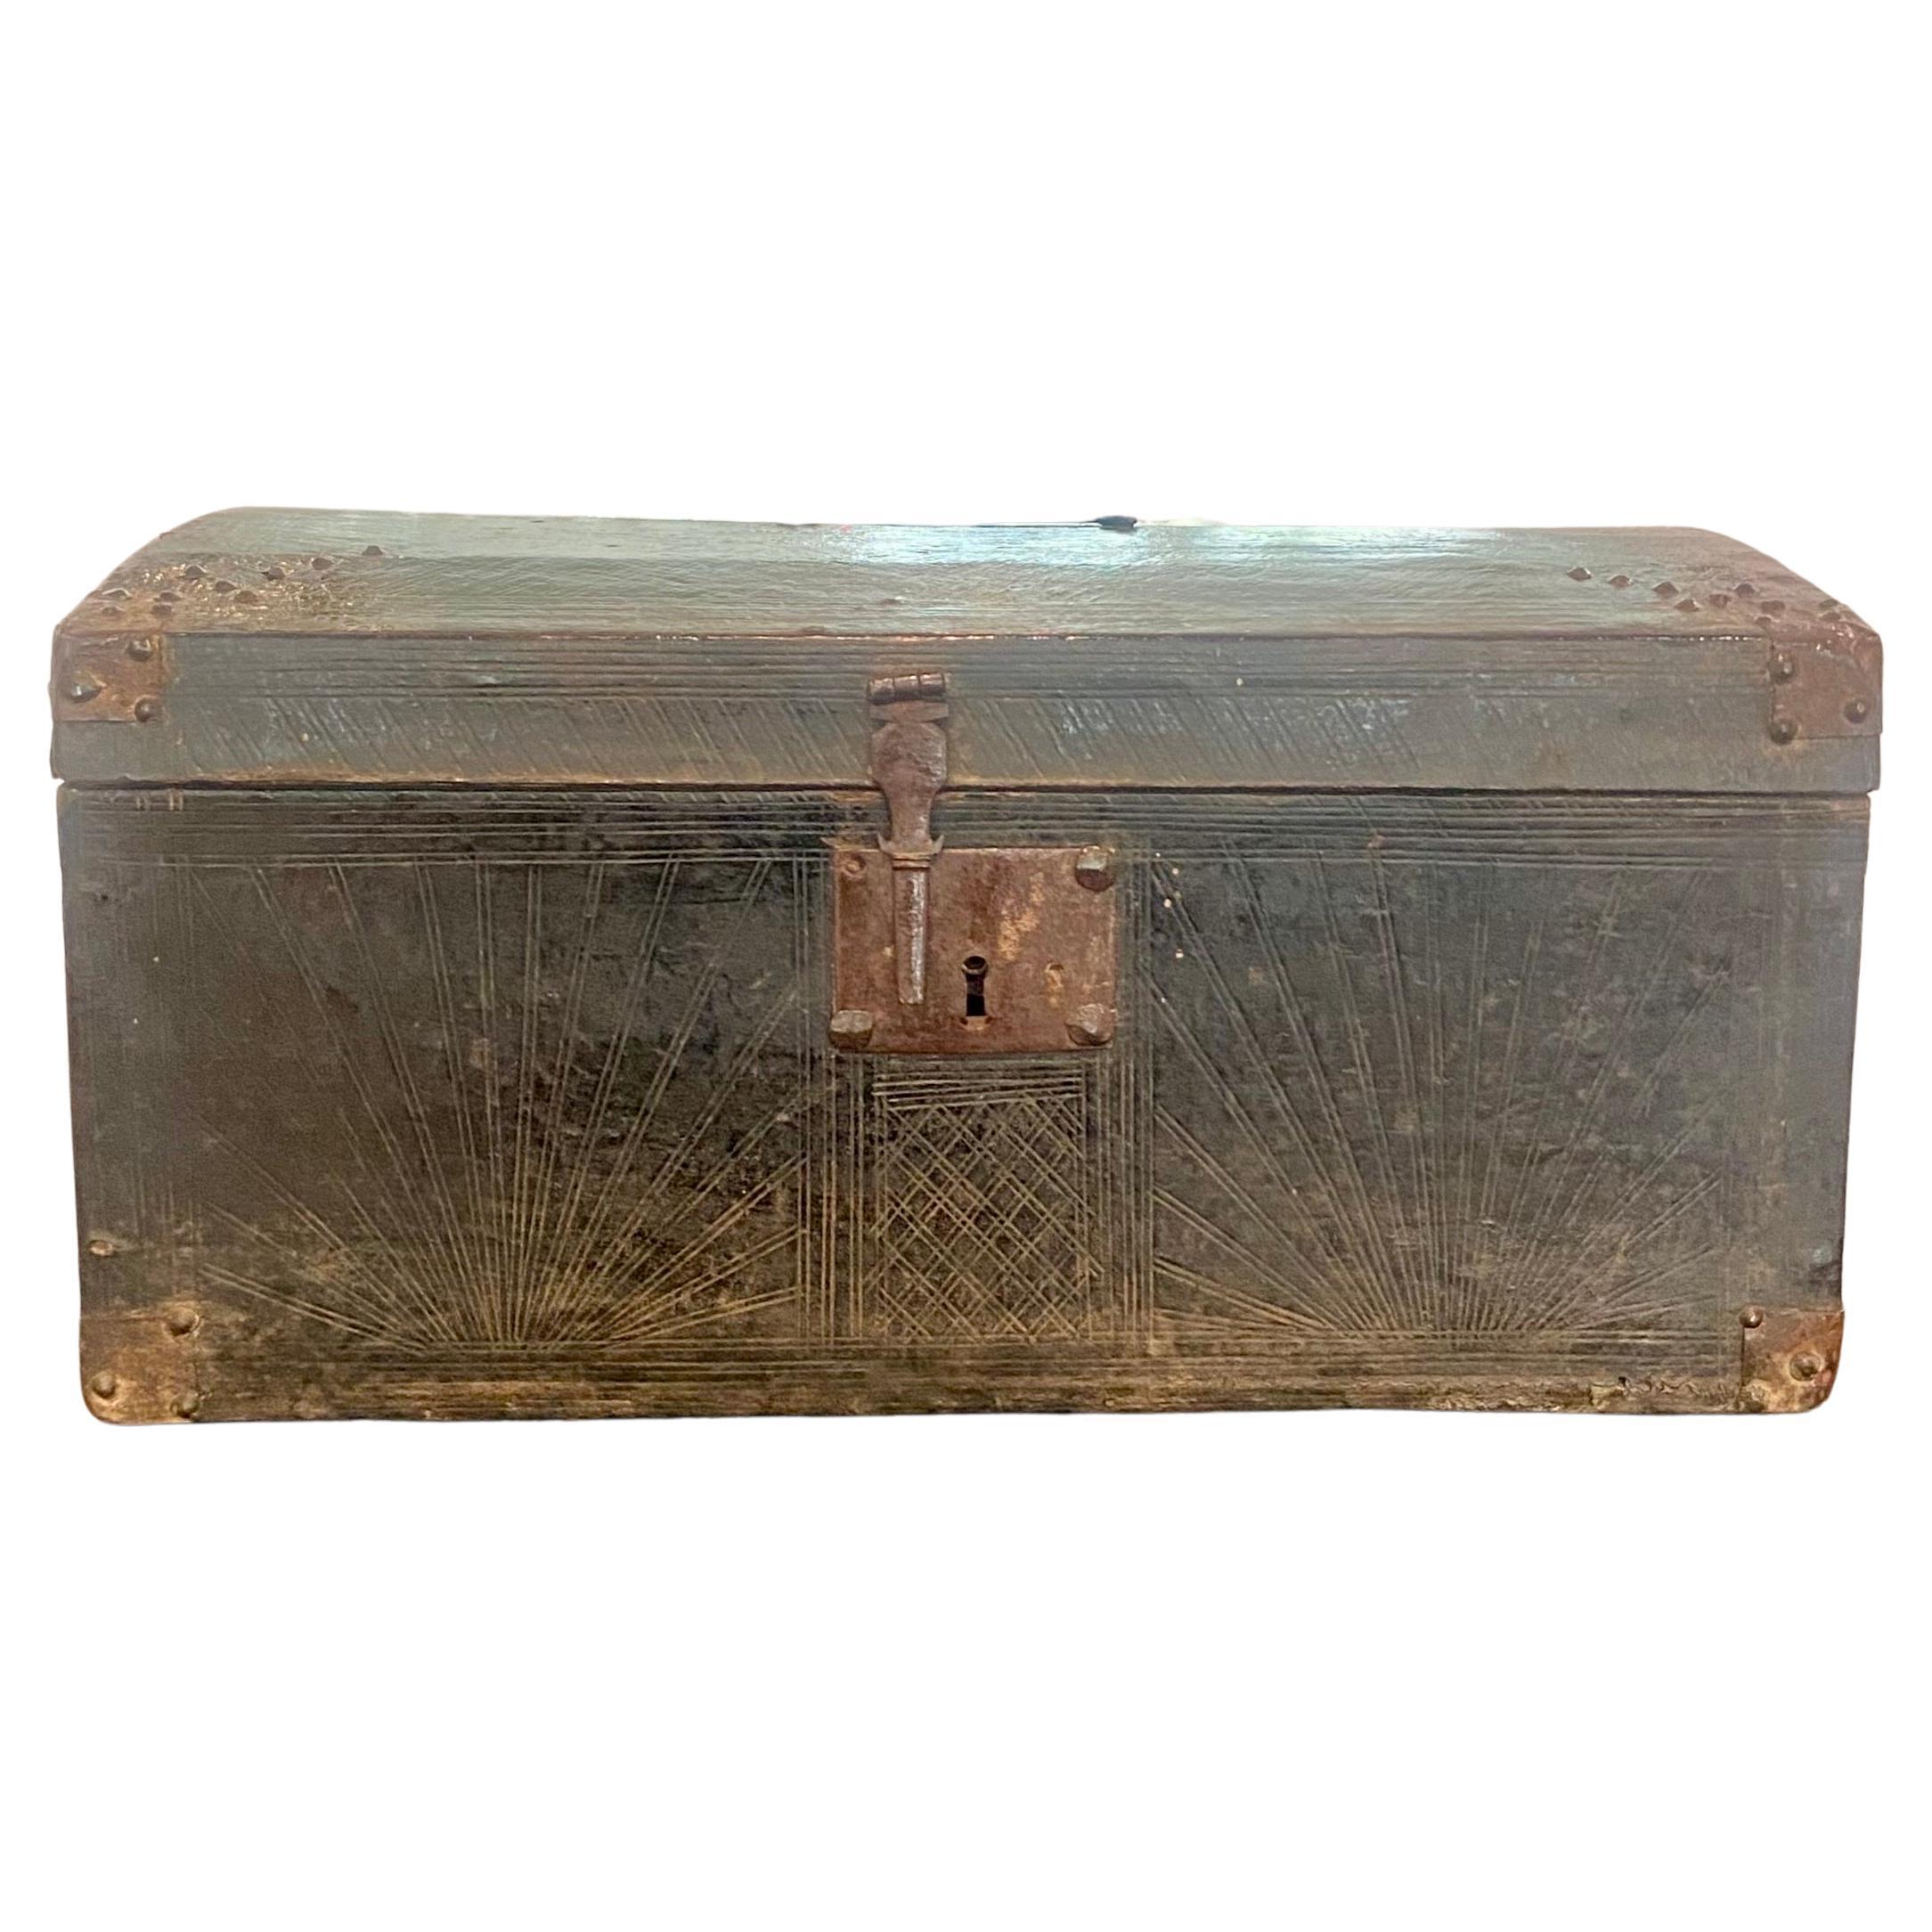 Rare Louis XIV period messenger box, Late 17th Early 18th century, in wood sheathed in black-tinted leather with a radiant sun motif.
This solar decoration is certainly a reference to the 